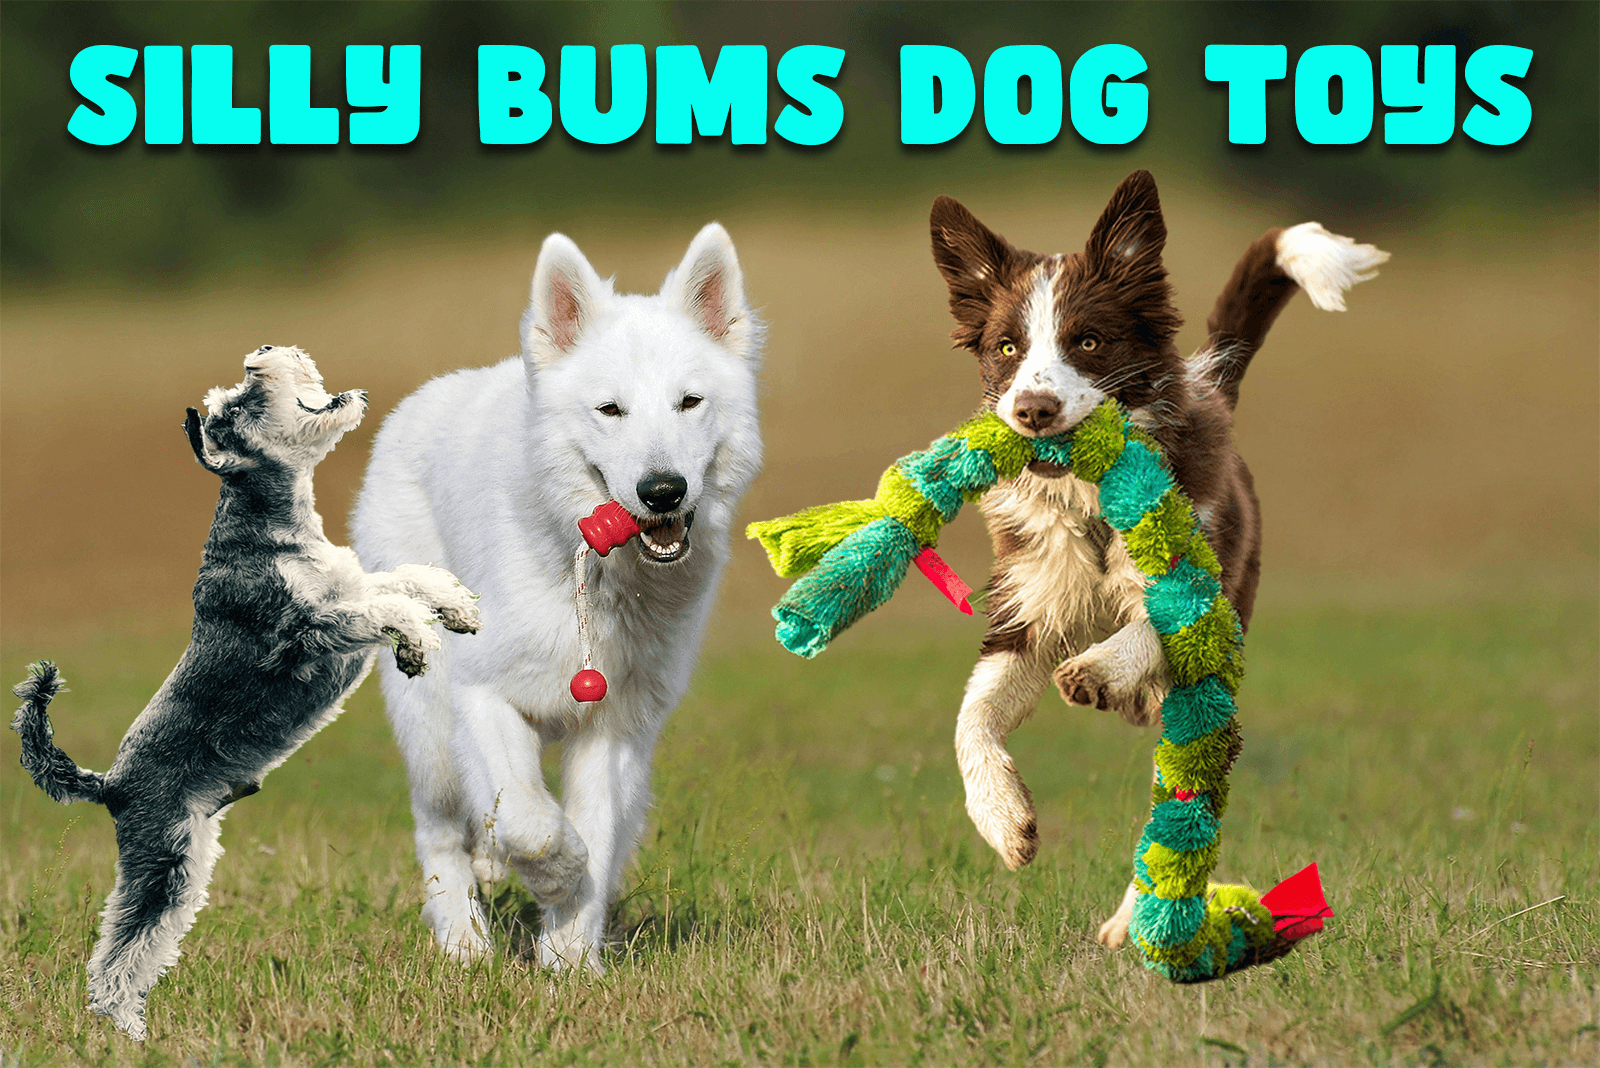 Silly Bums Dog Toys